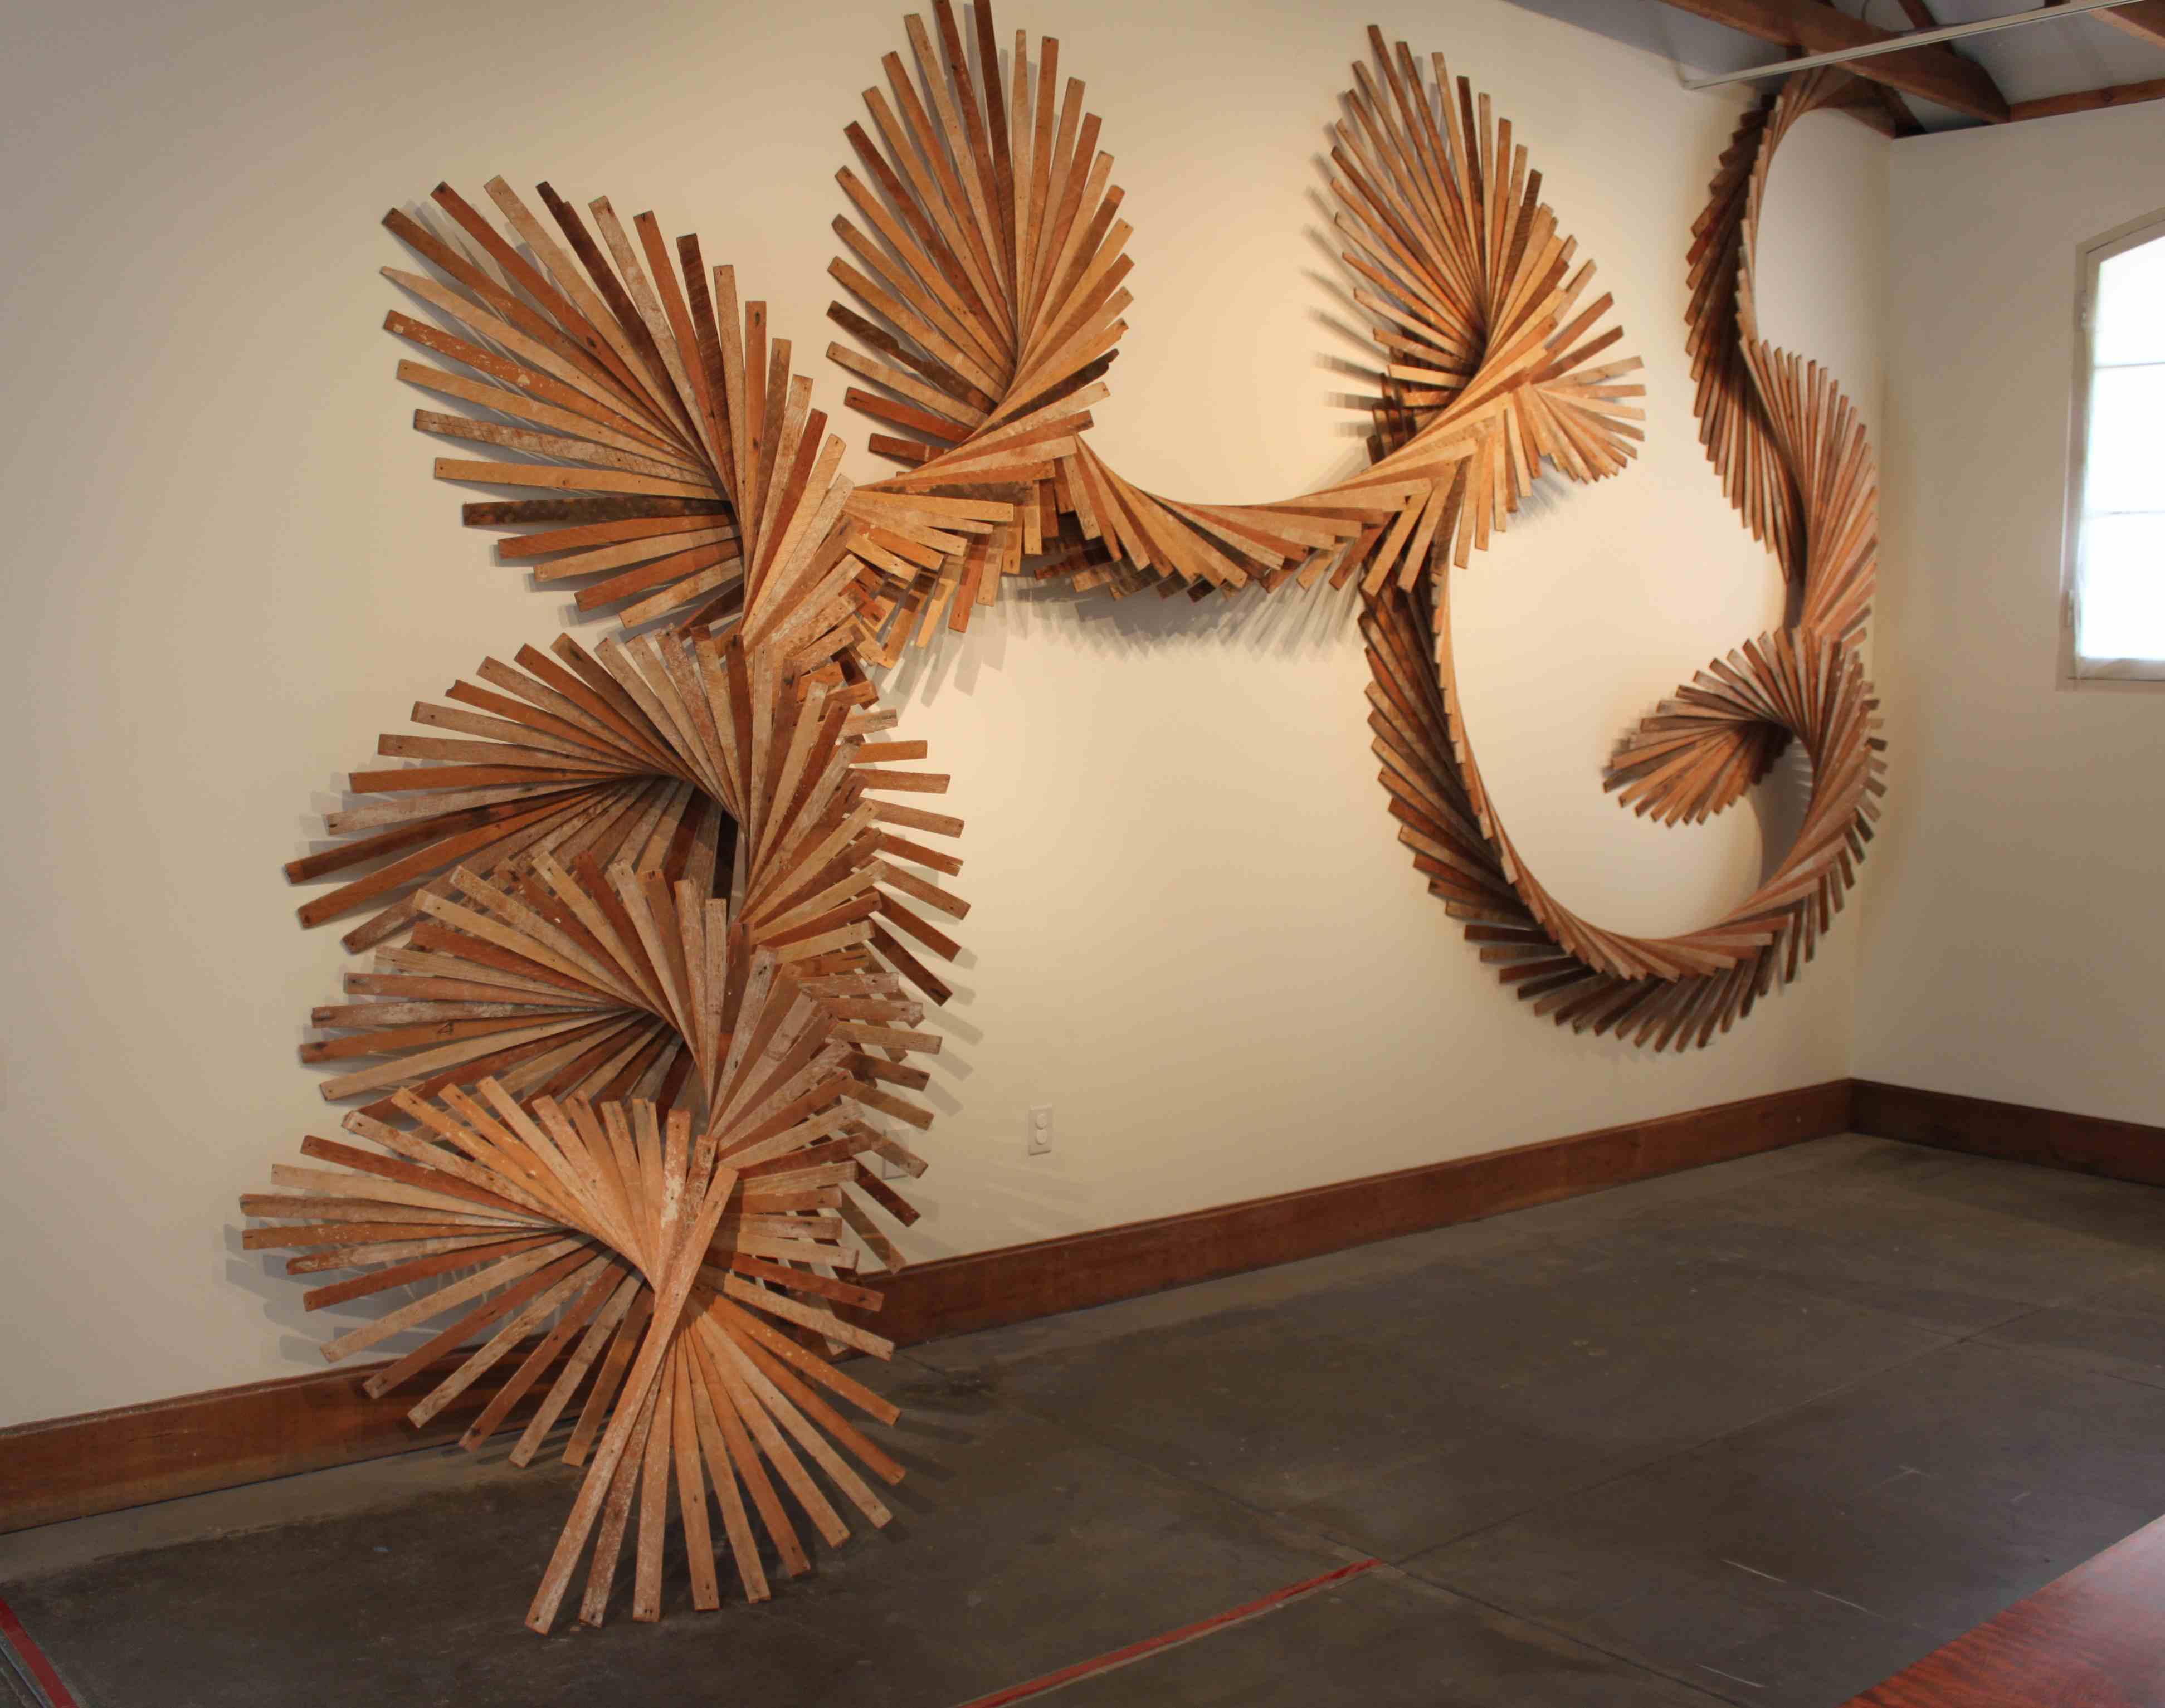  woodworking exhibition at the Petaluma Arts Center through March 13